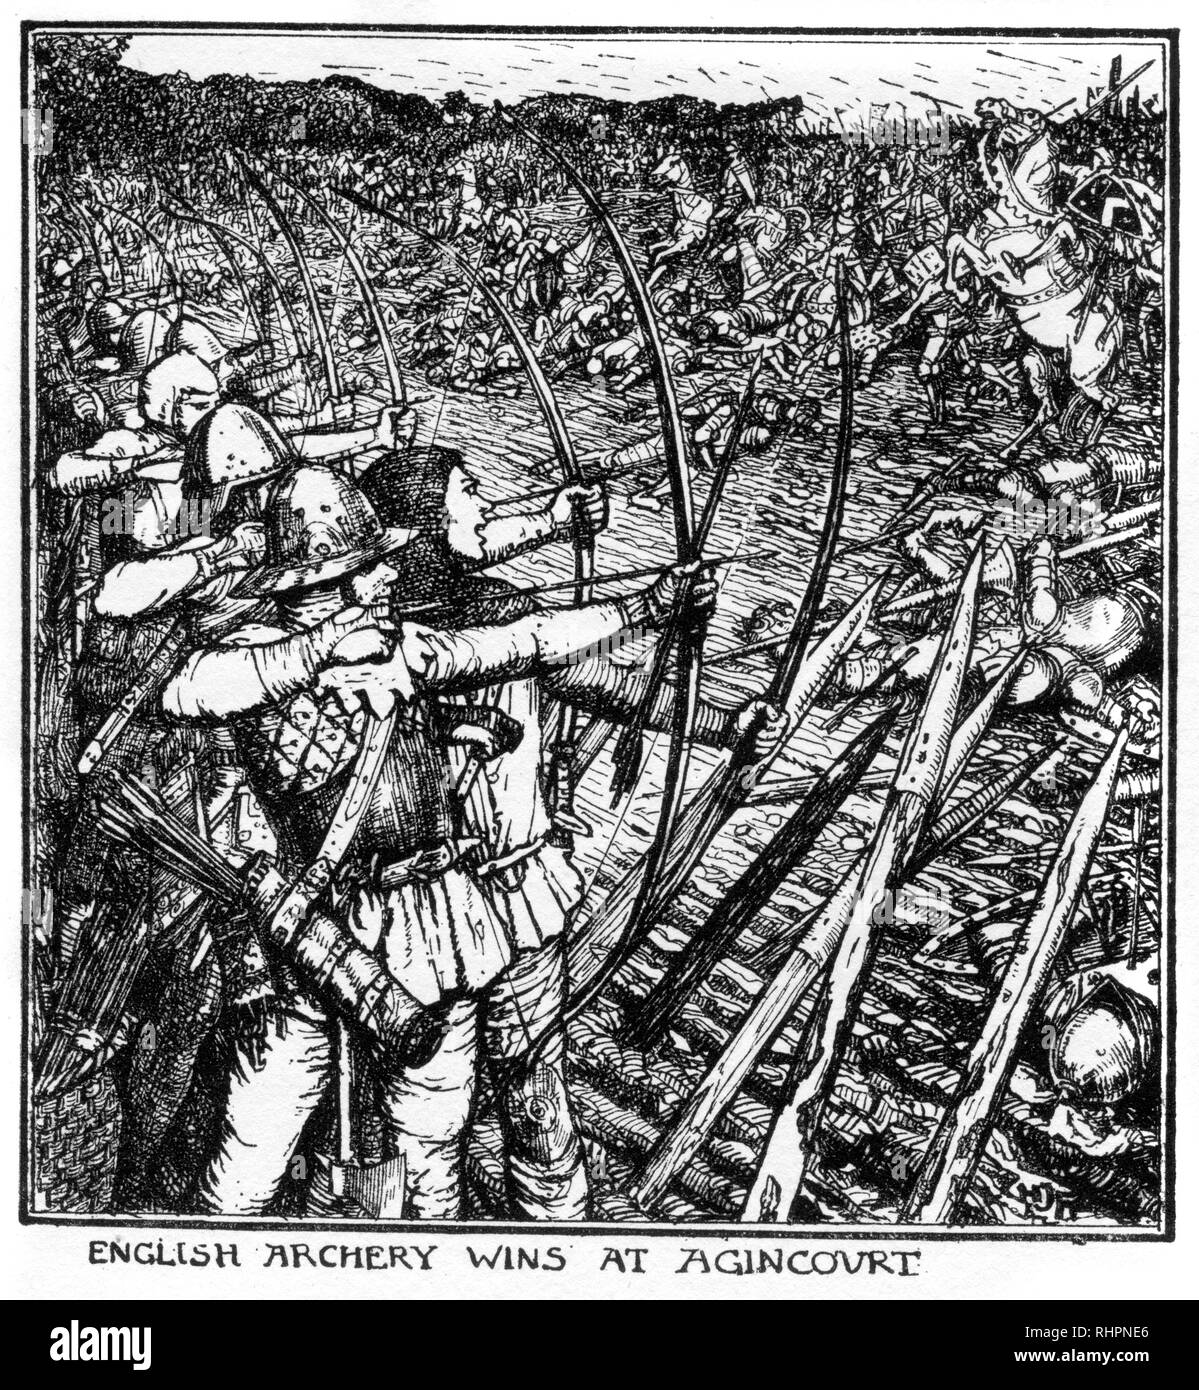 English archery wins at Agincourt. The Battle of Agincourt (Azincourt) was a major English victory in the Hundred Years' War. It took place on 25th October 1415, in the County of Saint-Pol, Artois, 40 km south of Calais. Stock Photo